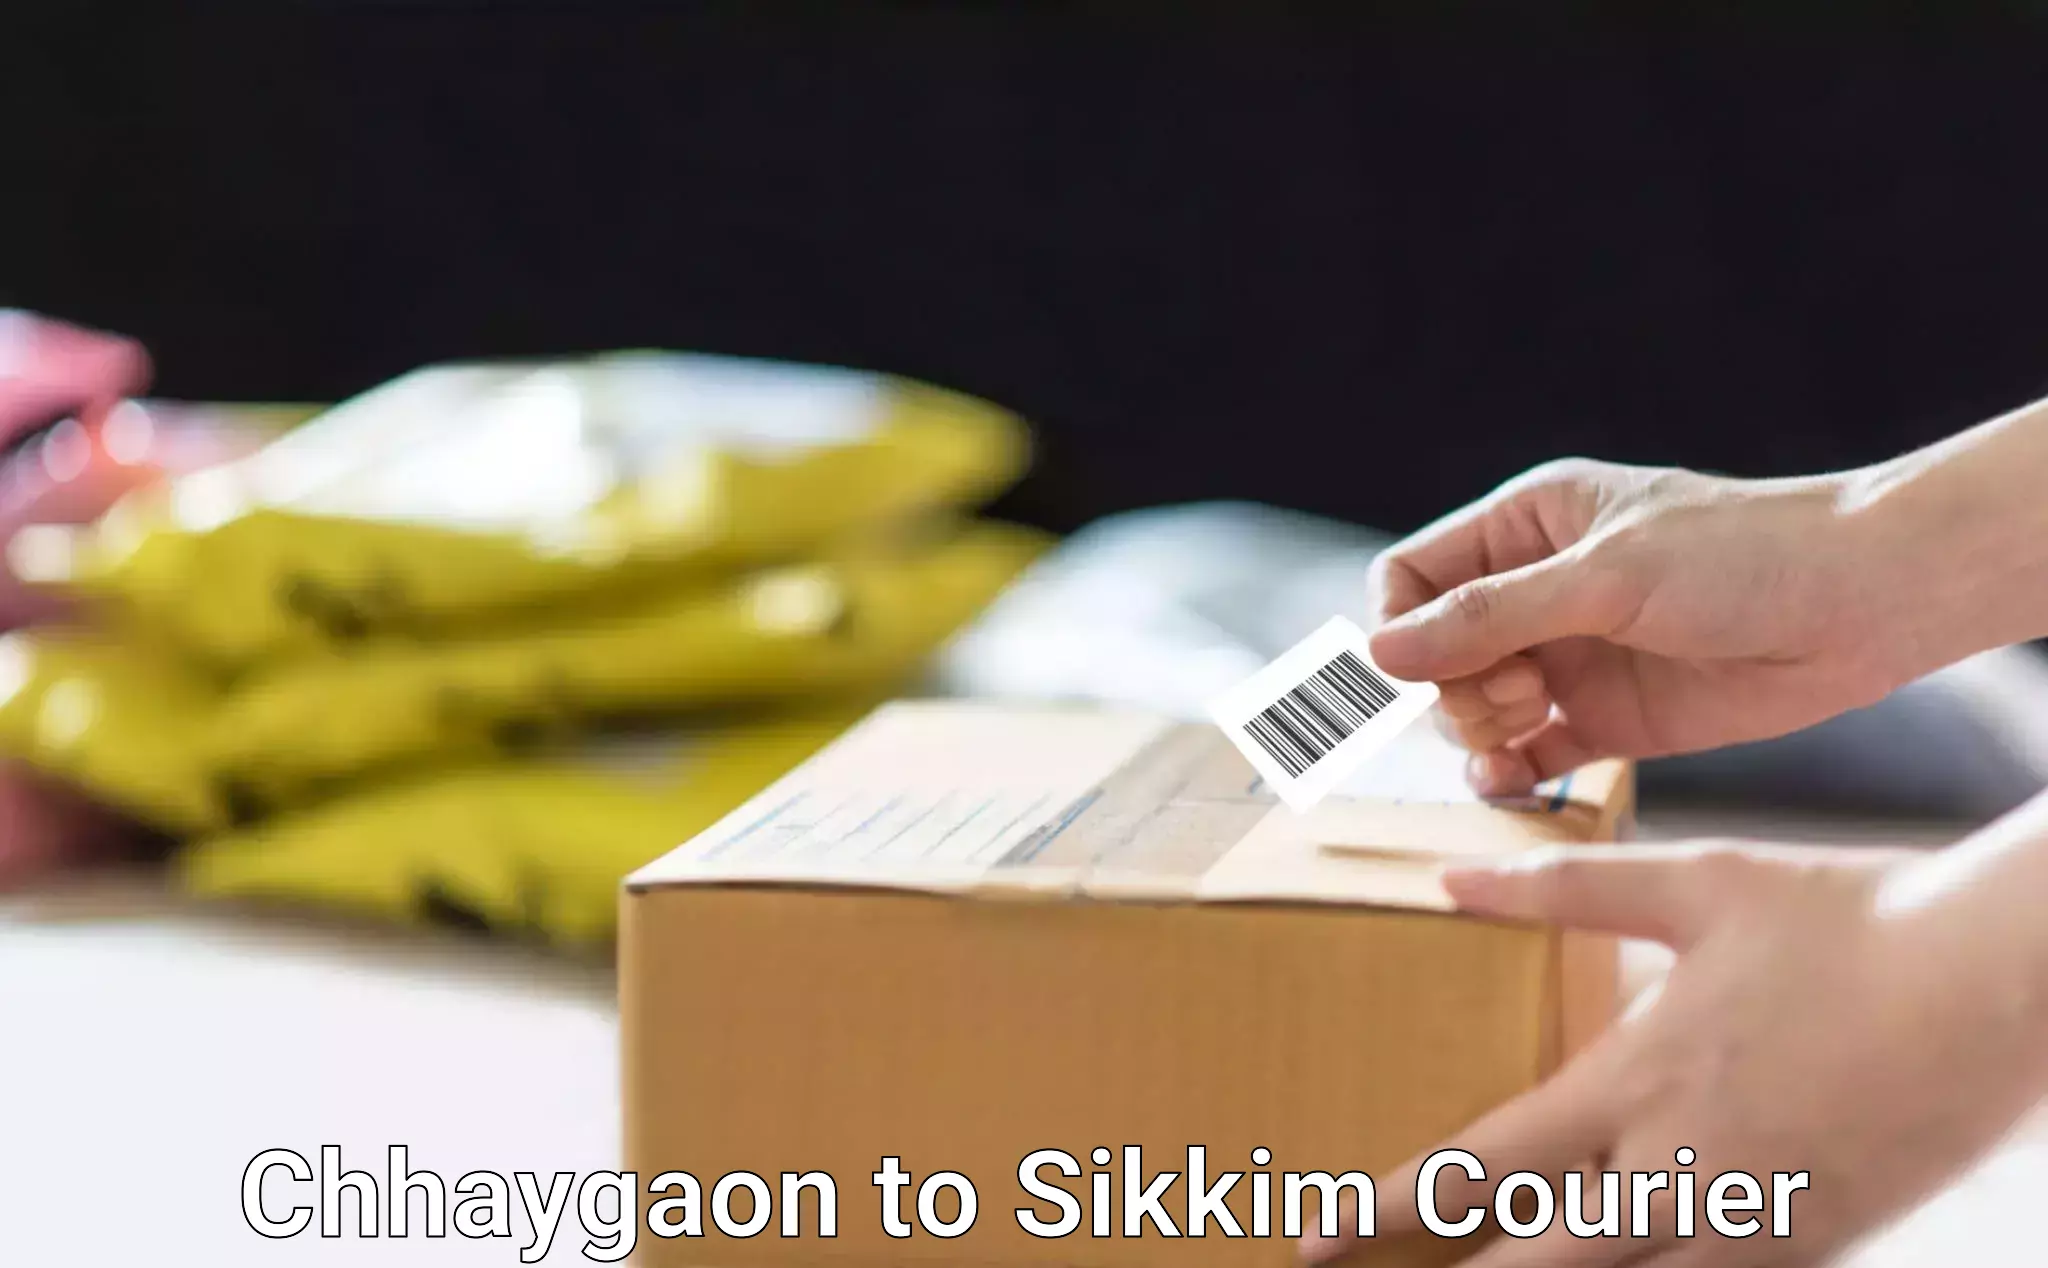 International courier networks Chhaygaon to North Sikkim